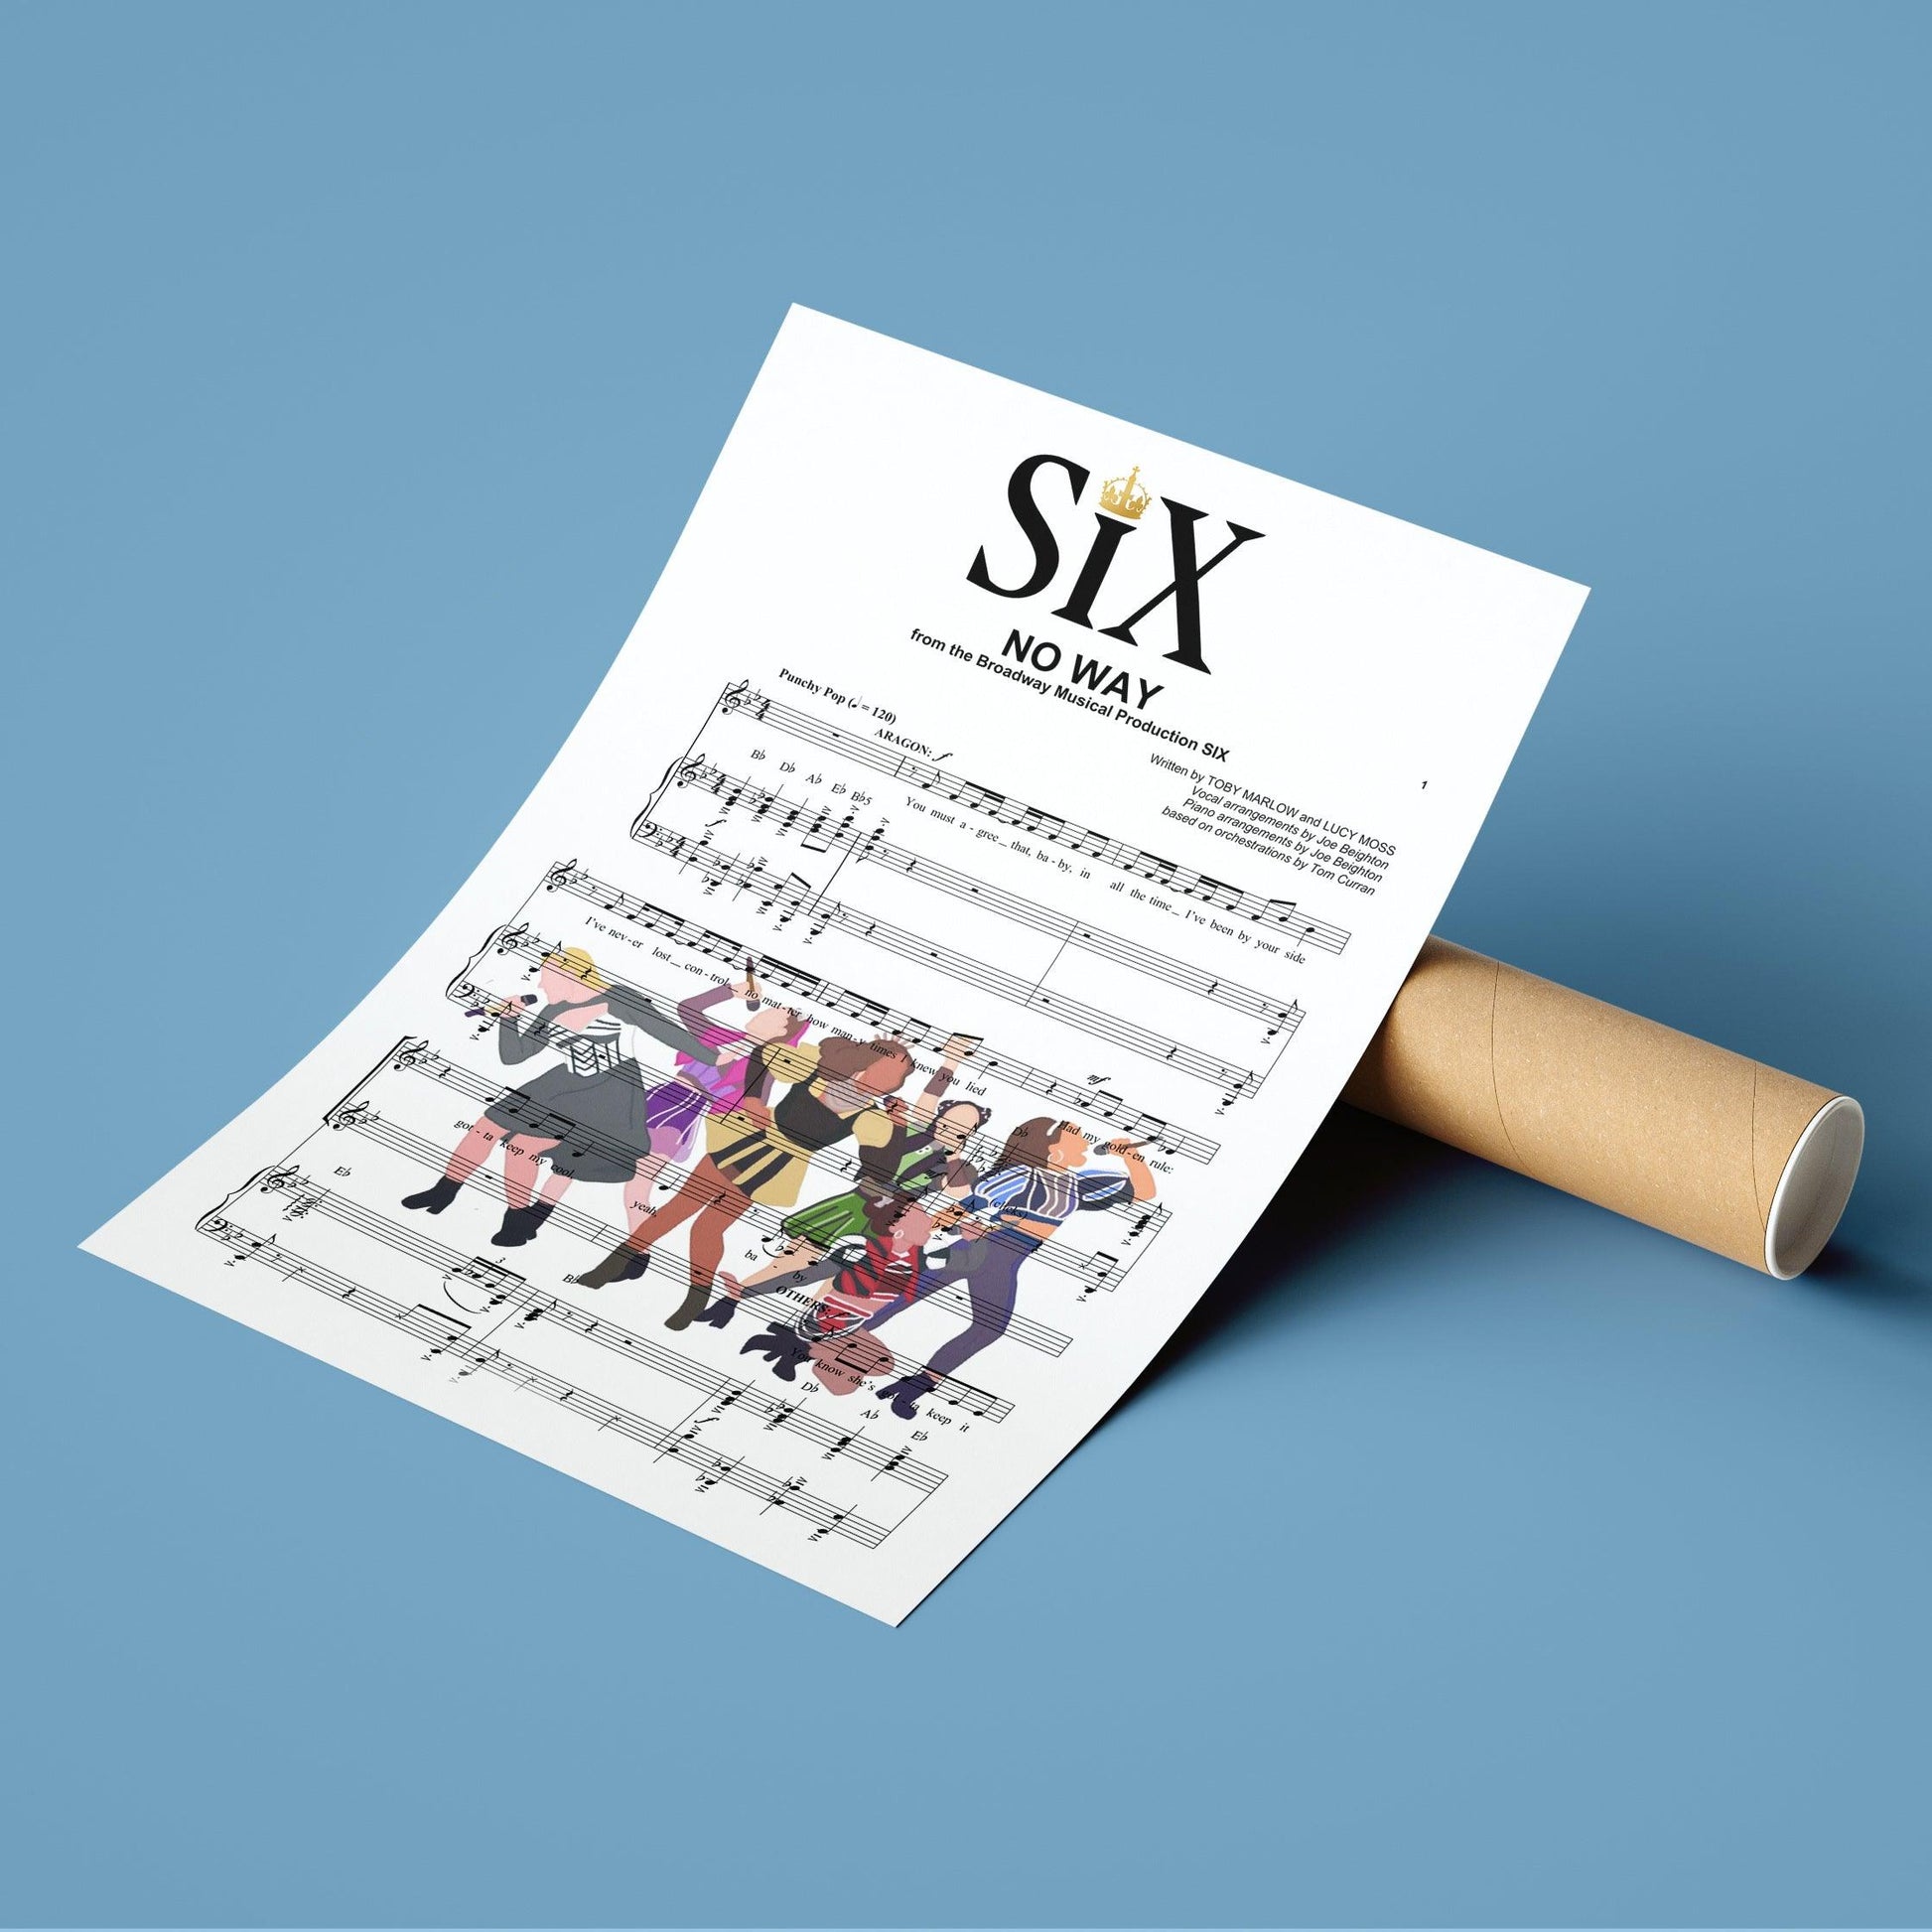 Six - No way Print | Song Music Sheet Notes Print  Everyone has a favorite Song lyric prints and Six now you can show the score as printed staff. The personal favorite song lyrics art shows the song chosen as the score.